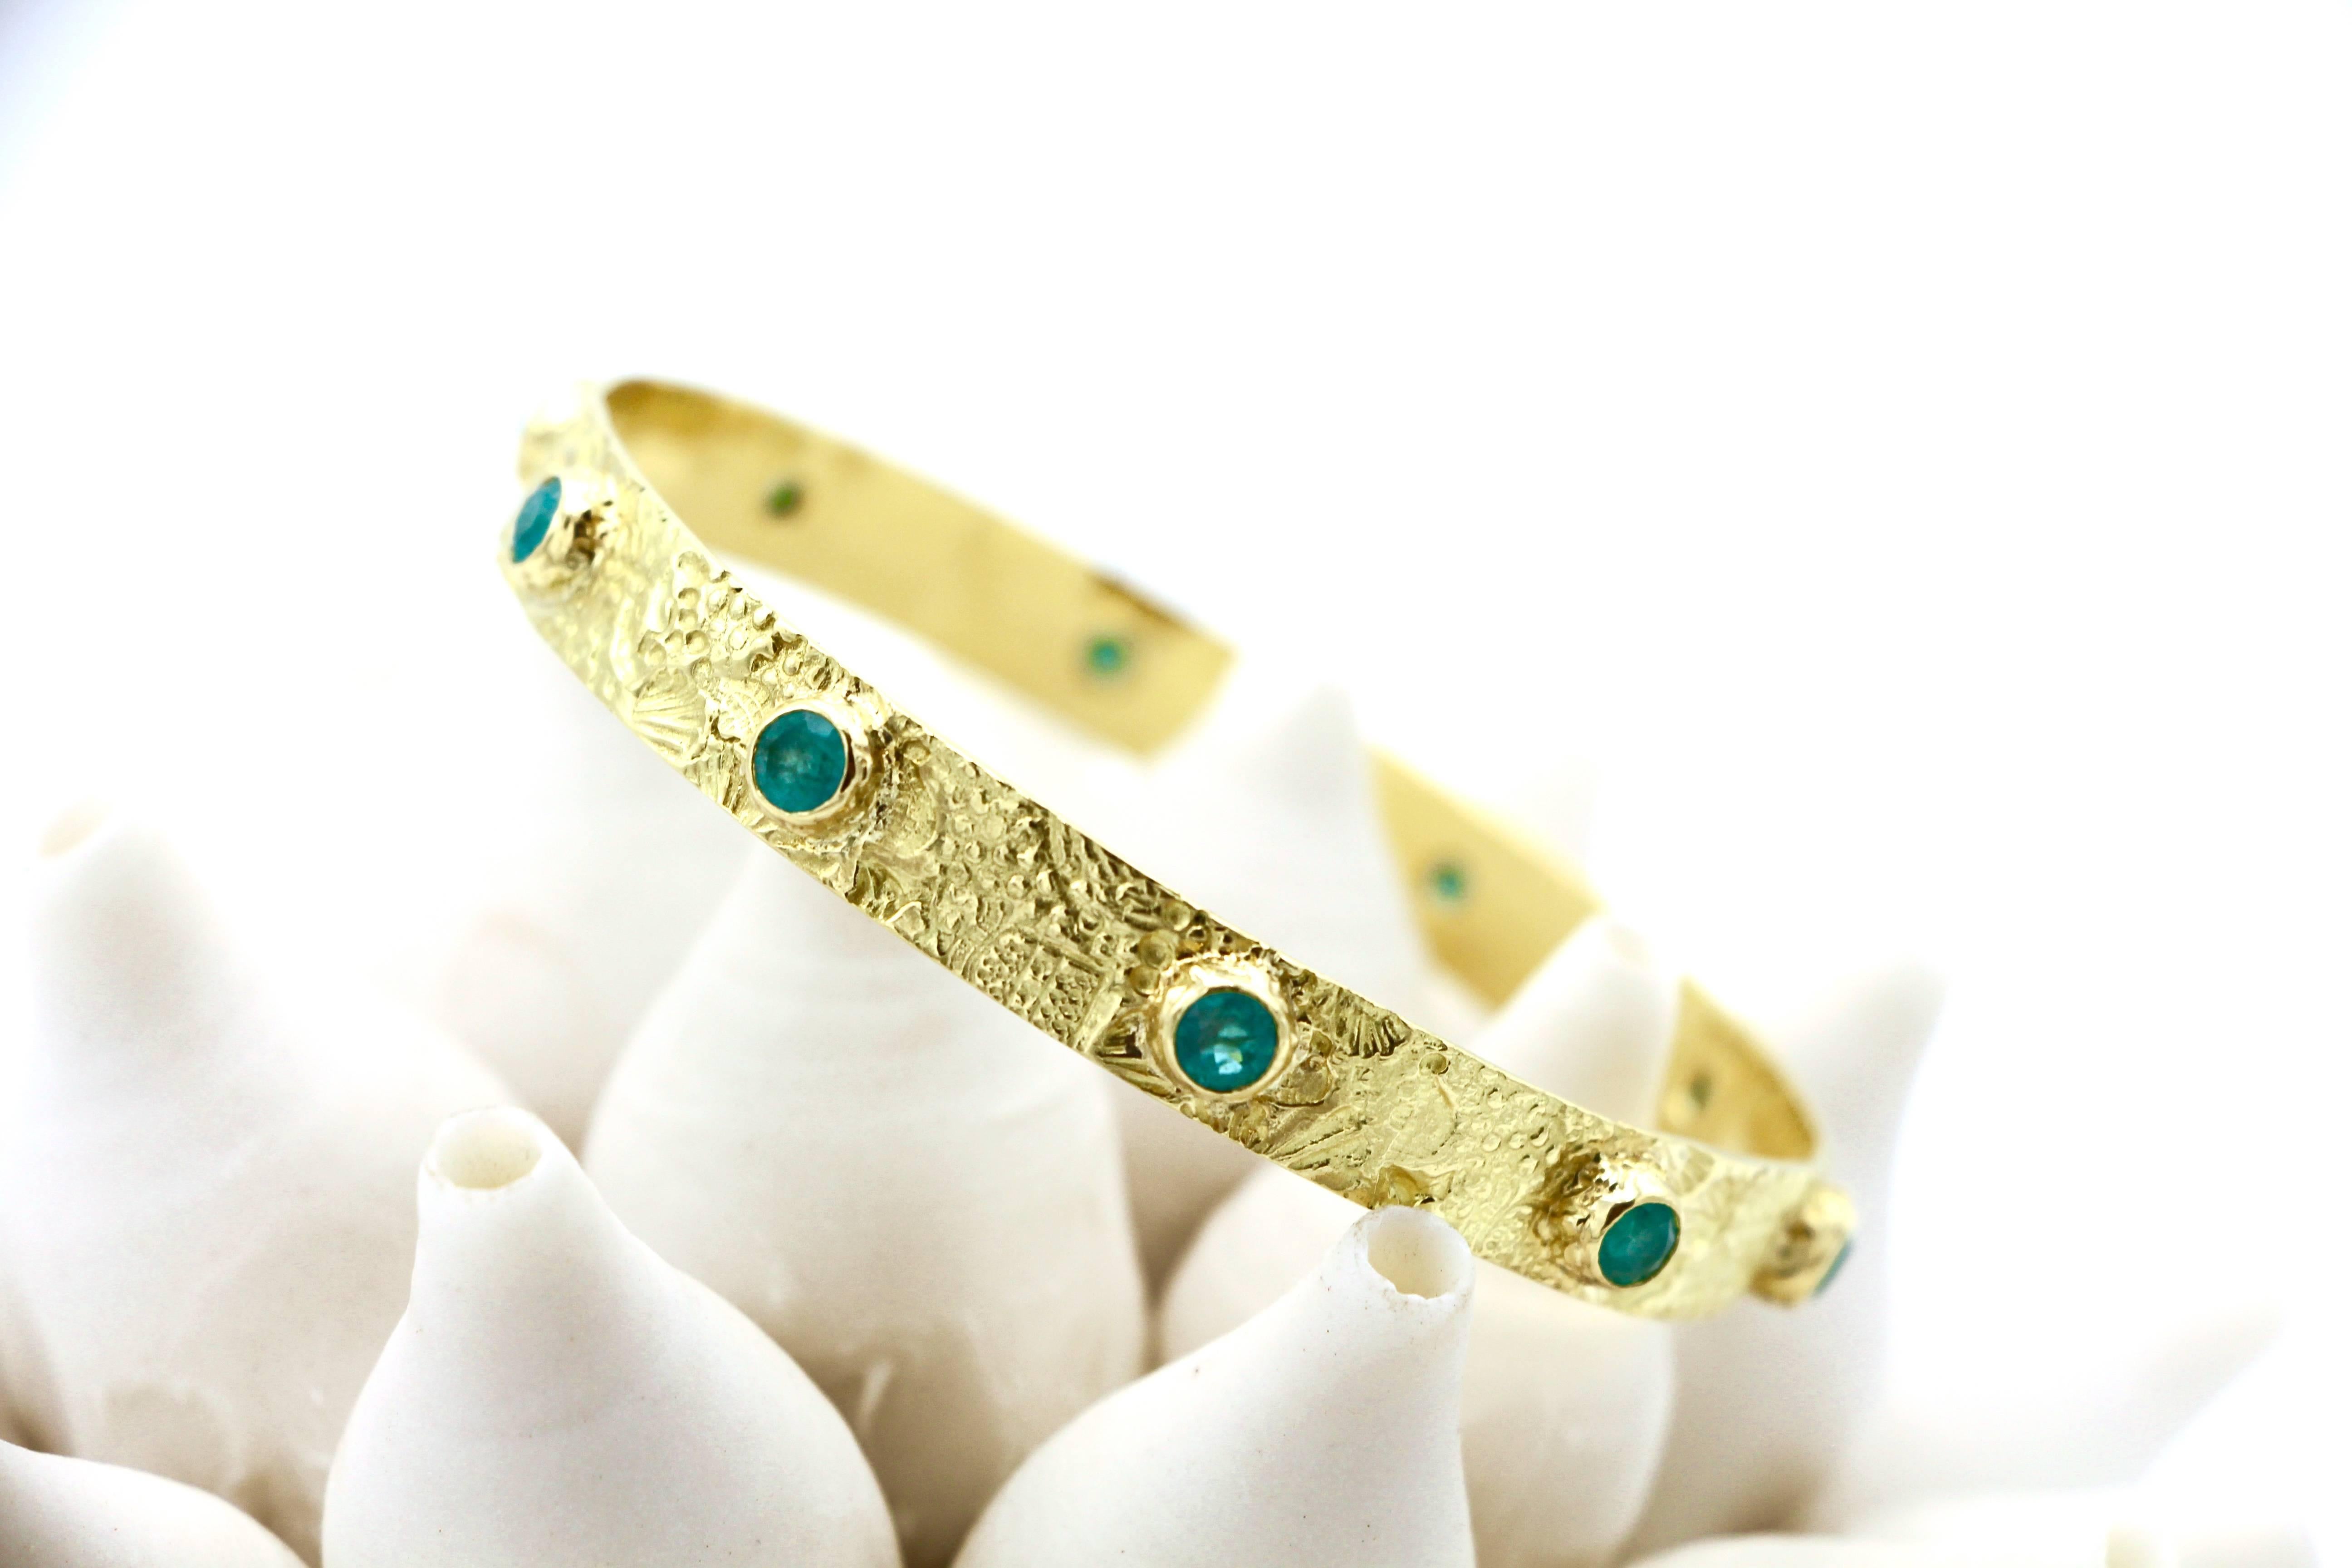 These rare, blue-green 4.68ct Brazilian Paraiba Tourmalines shine like tropical waters lapping onto an 18kt Gold beach of scattered shells and sand in this one-of-a-kind bangle.

